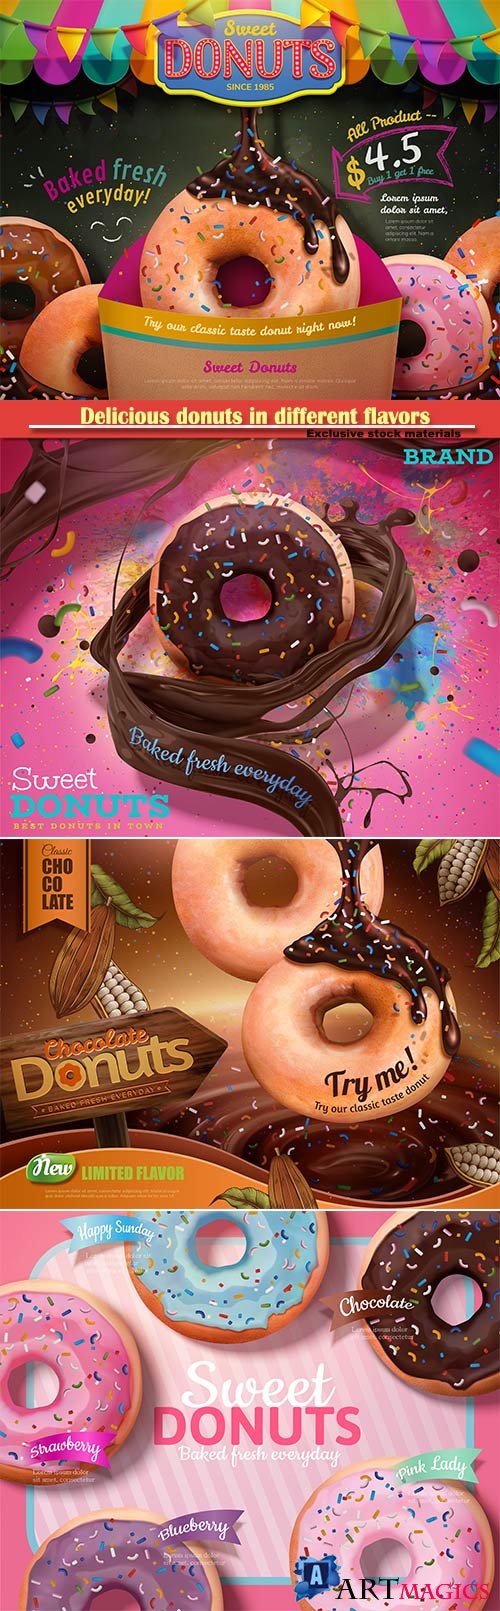 Delicious donuts in different flavors in 3d vector illustration